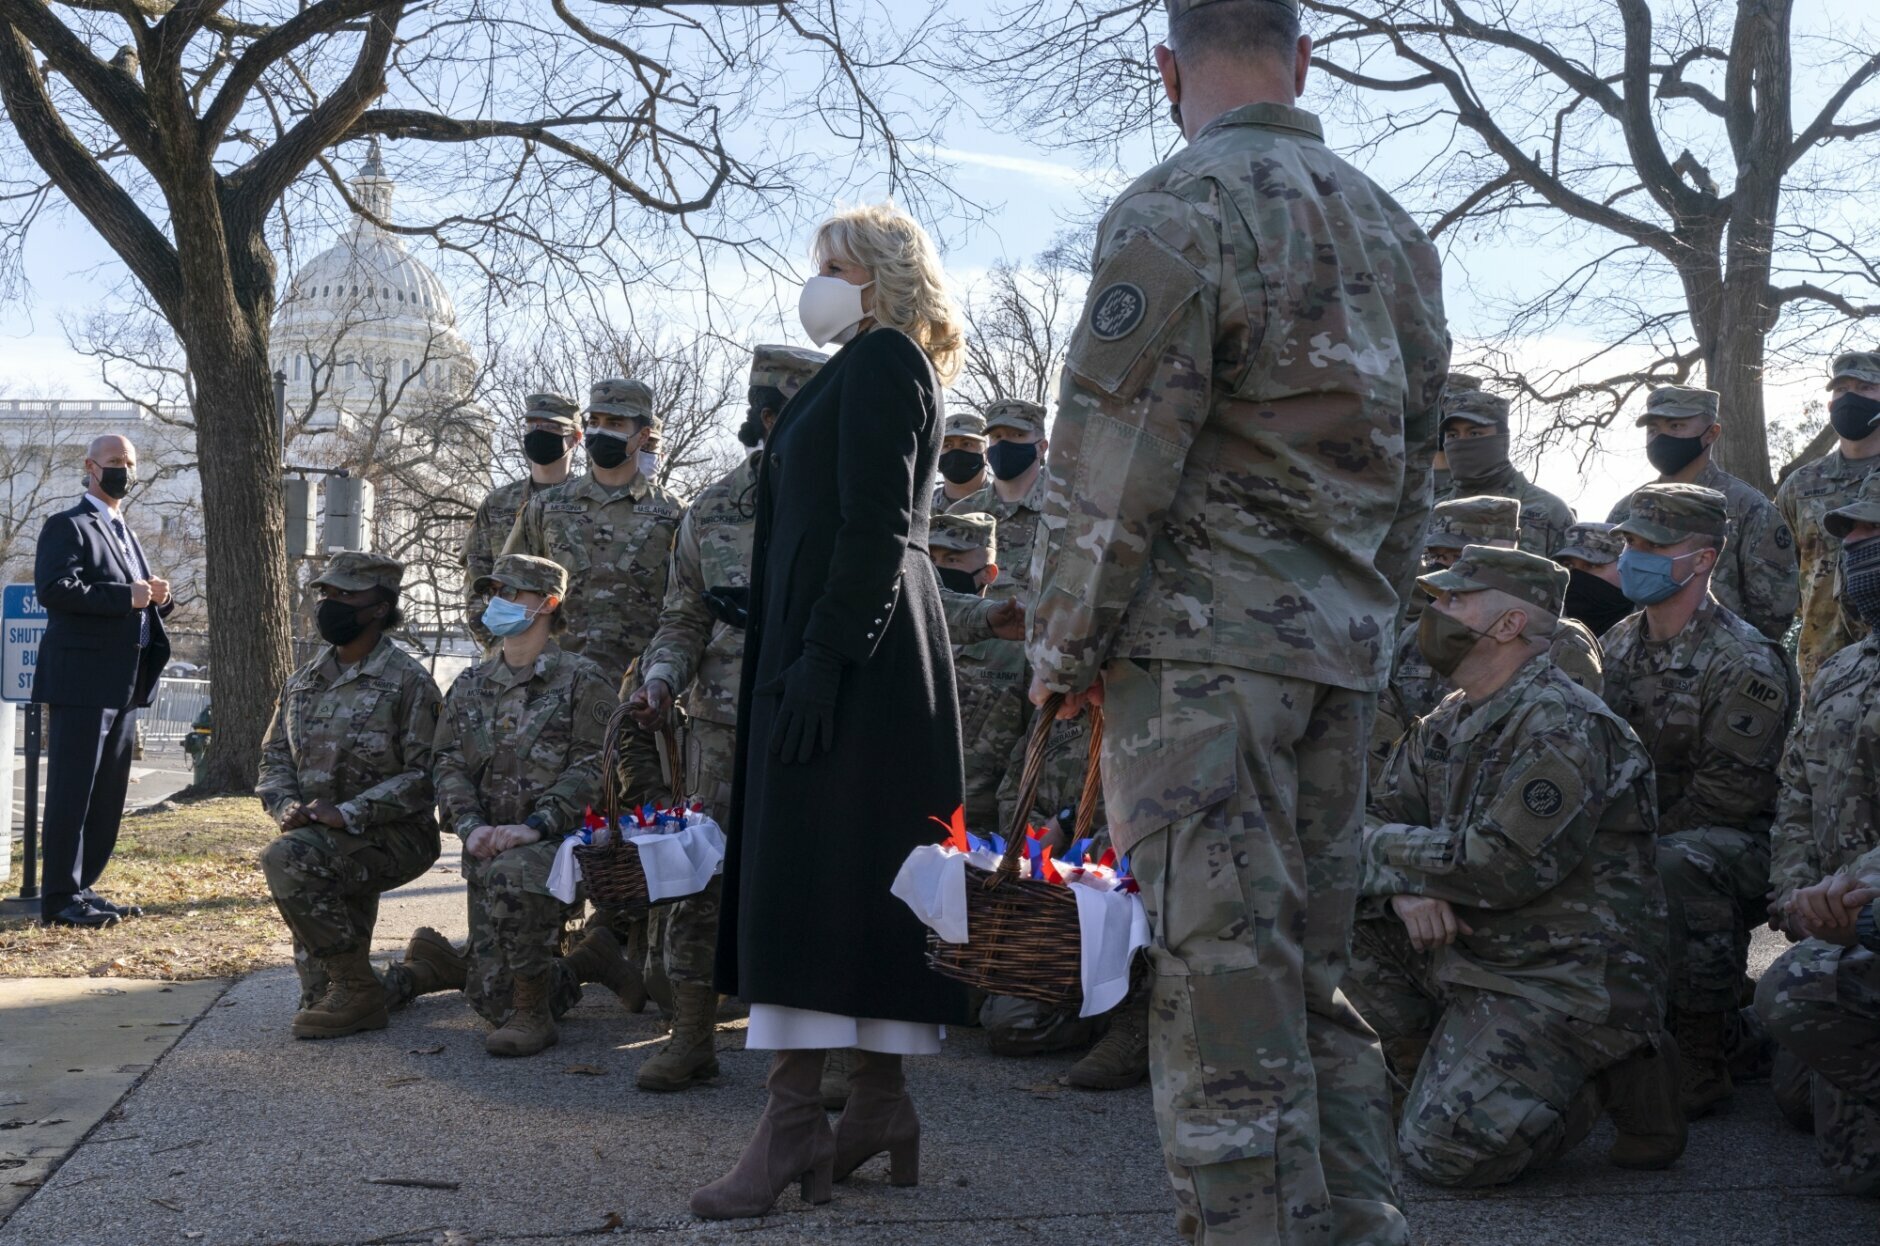 First lady Jill Biden poses for a photograph with members of the National Guard, after surprising them with chocolate chip cookies, Friday, Jan. 22, 2021, at the U.S. Capitol in Washington. (AP Photo/Jacquelyn Martin, Pool)